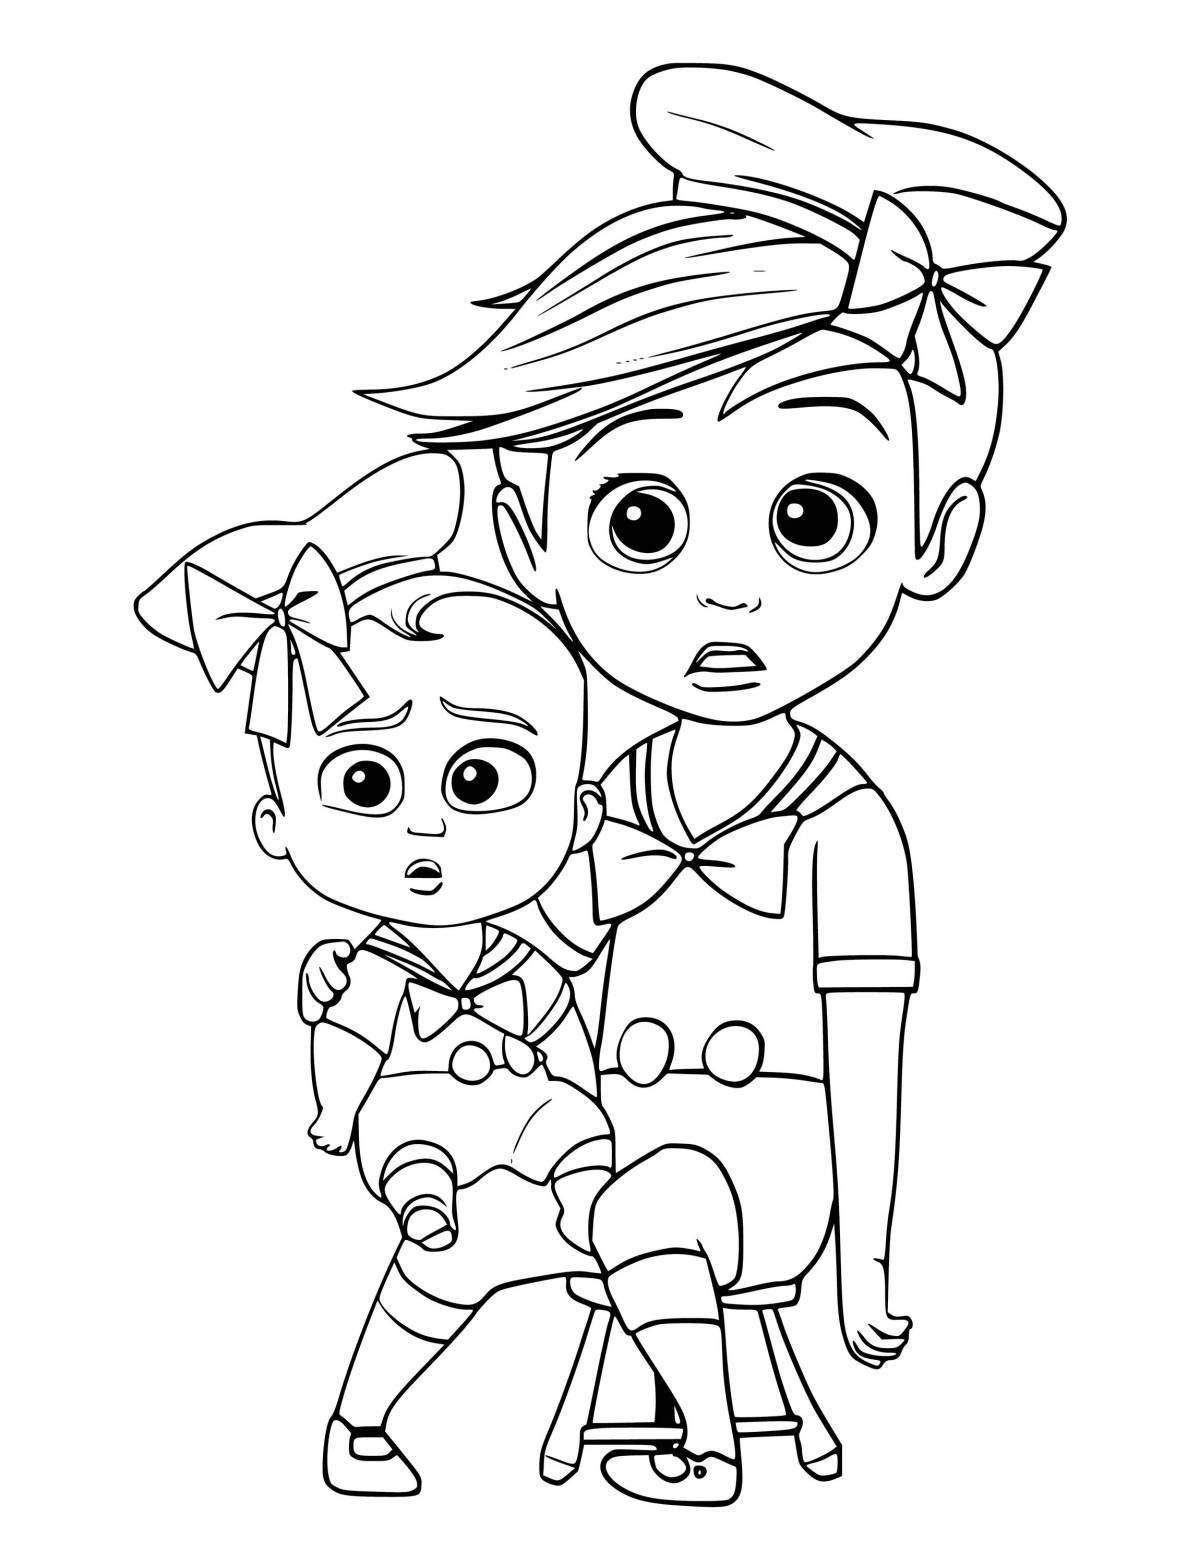 Coloring page funny baby boss